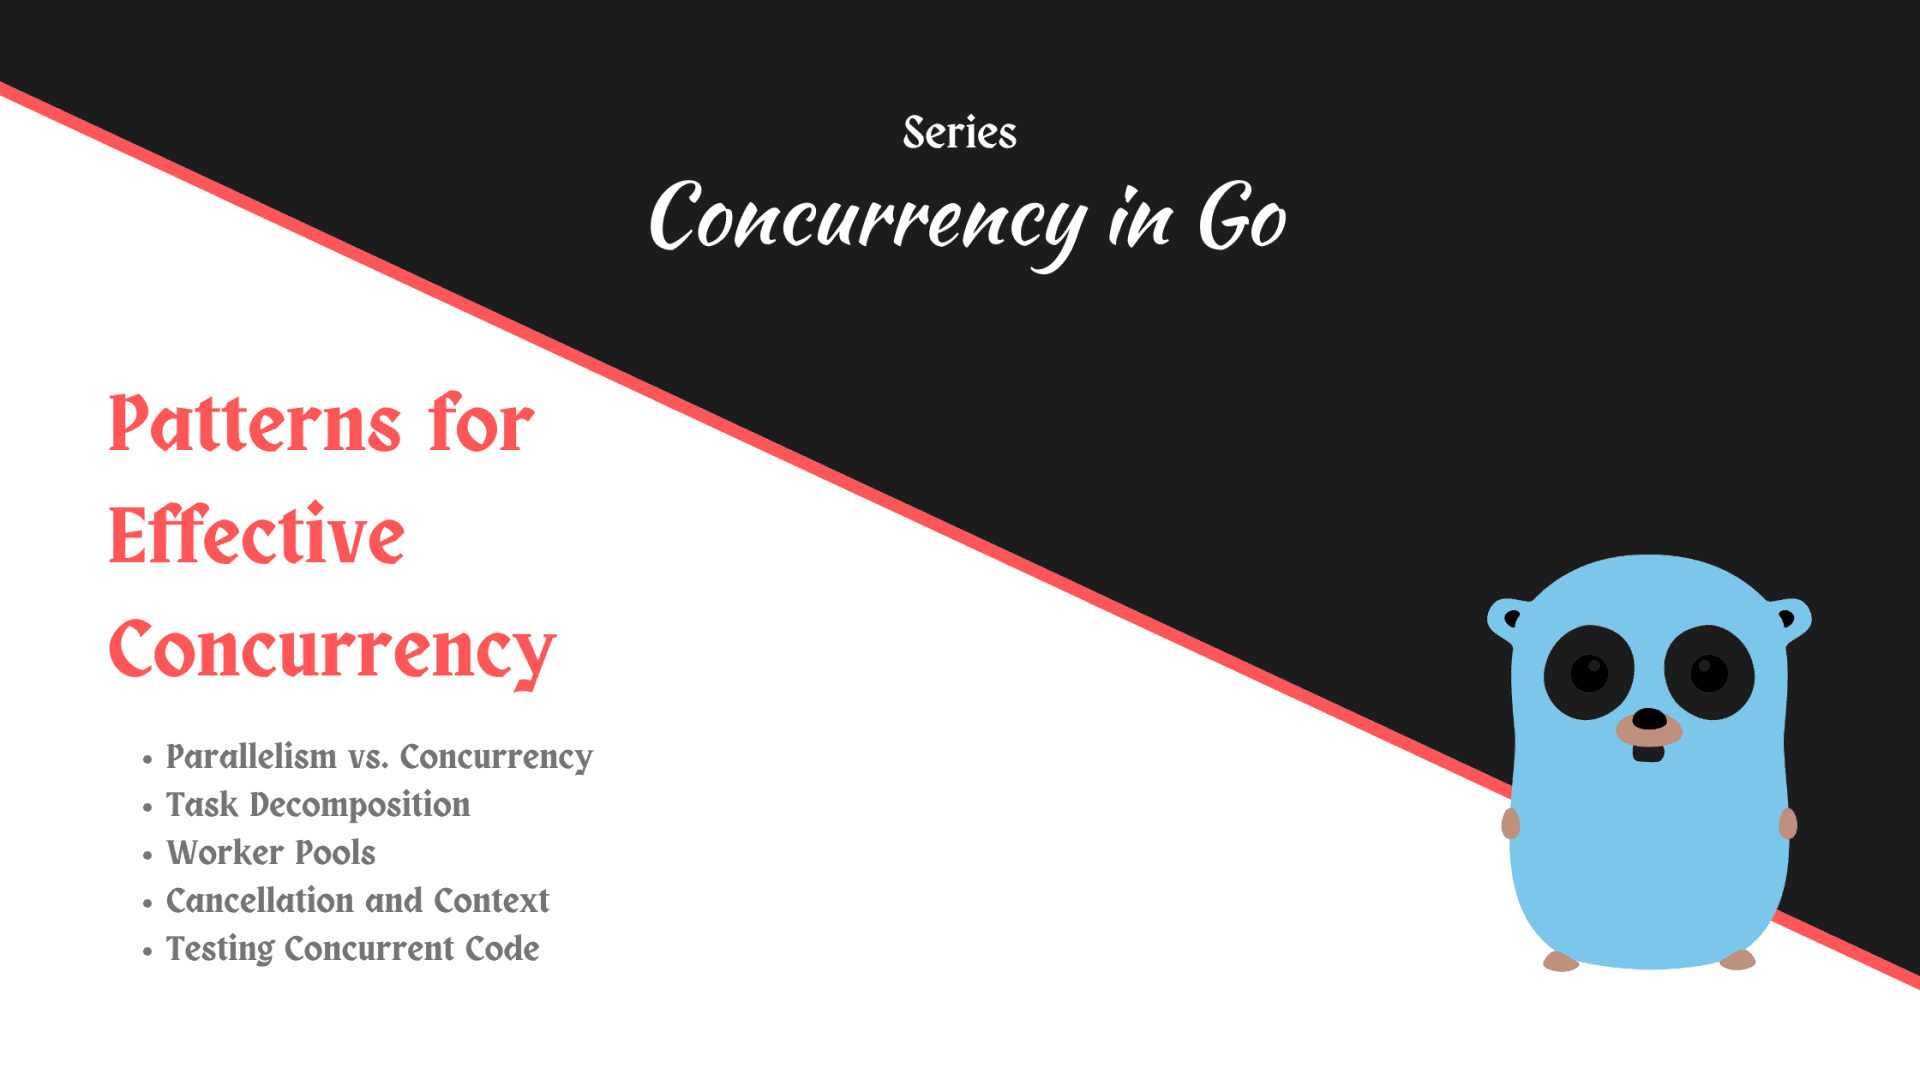 Patterns for Effective Concurrency in Go